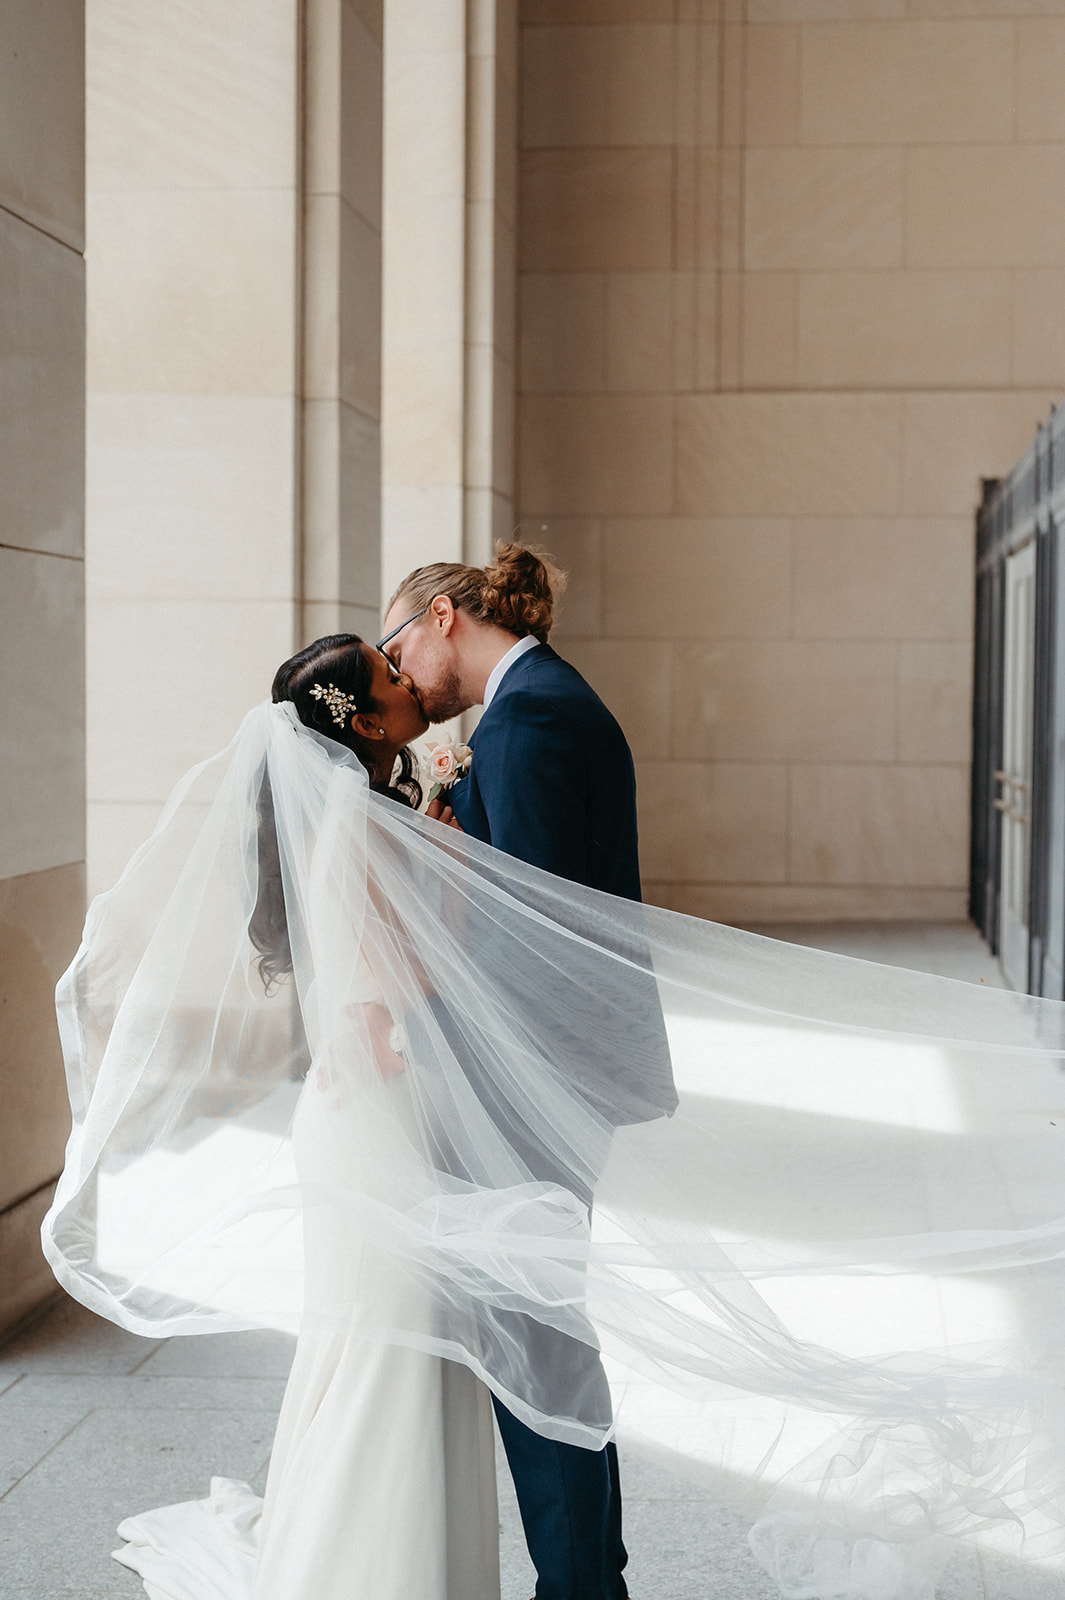 Couple sharing a kiss as bride's veil sways in the wind, taken by Michigan wedding photographer Mary Shelton